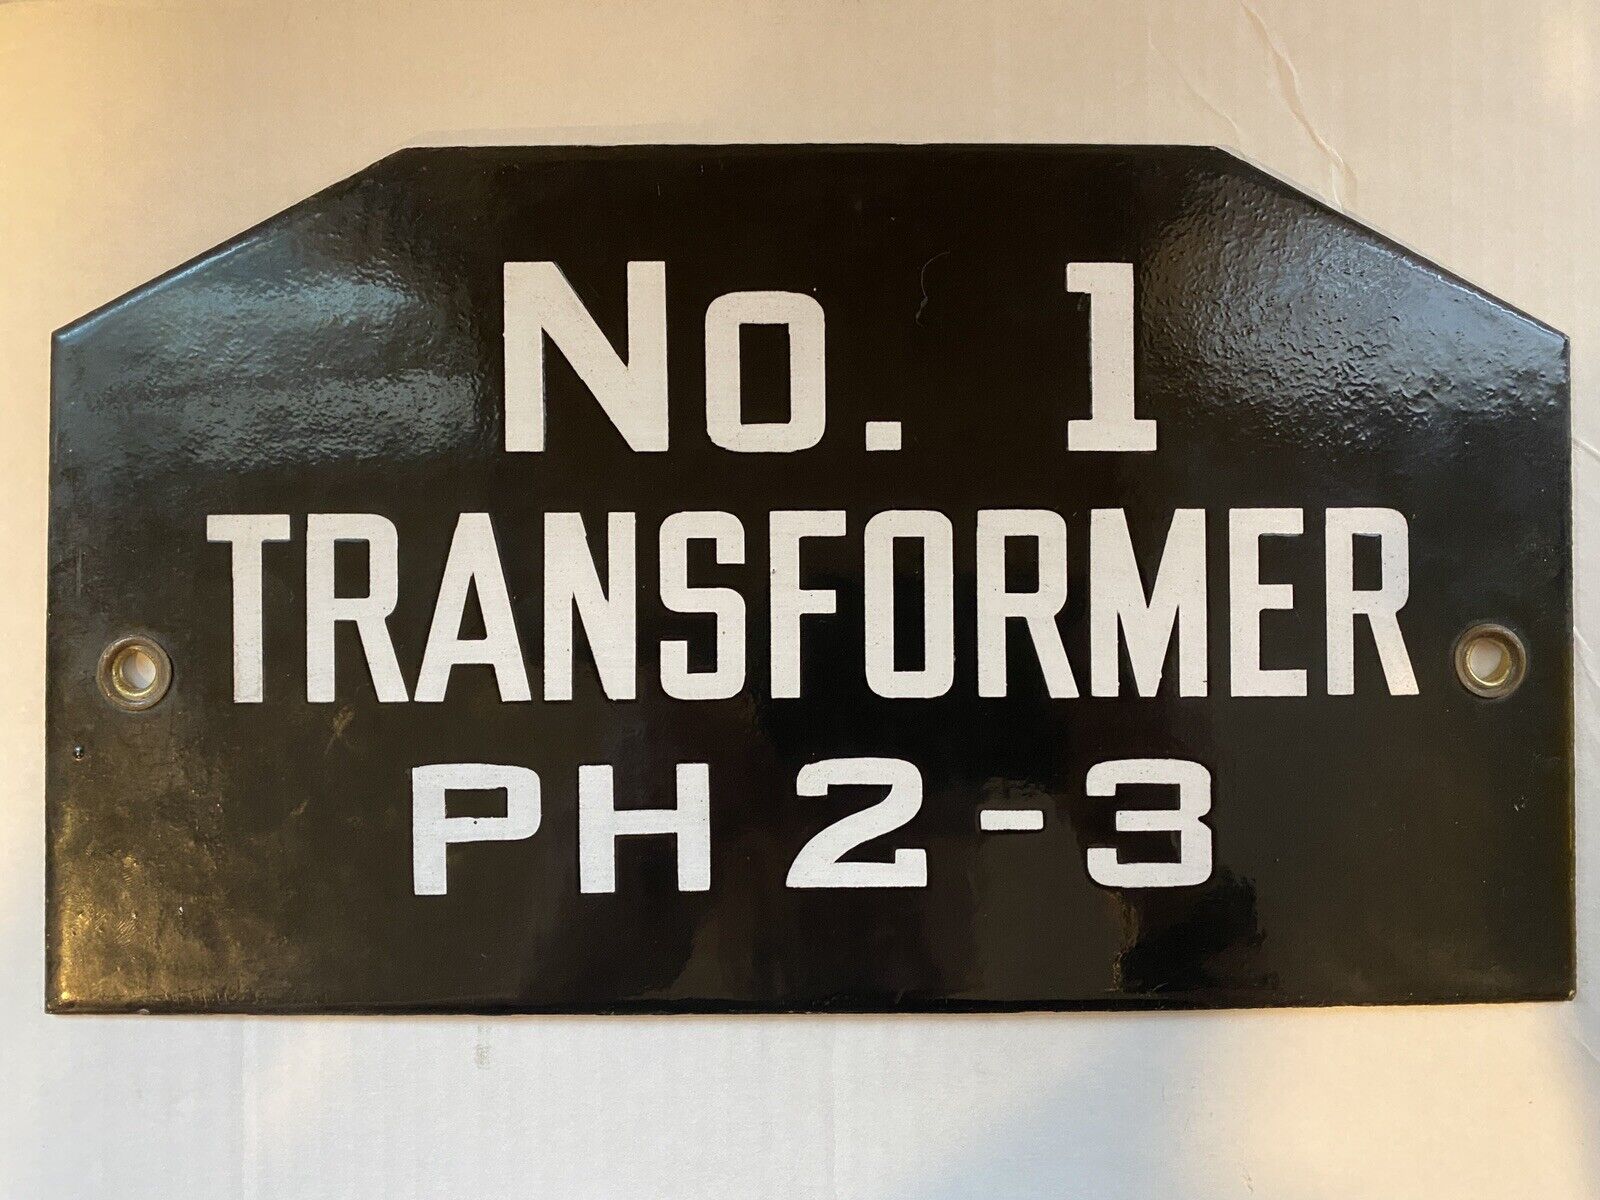 Antique Porcelain Industrial Sign No 1 Transformer PH 2-3 Machinery Power Plant